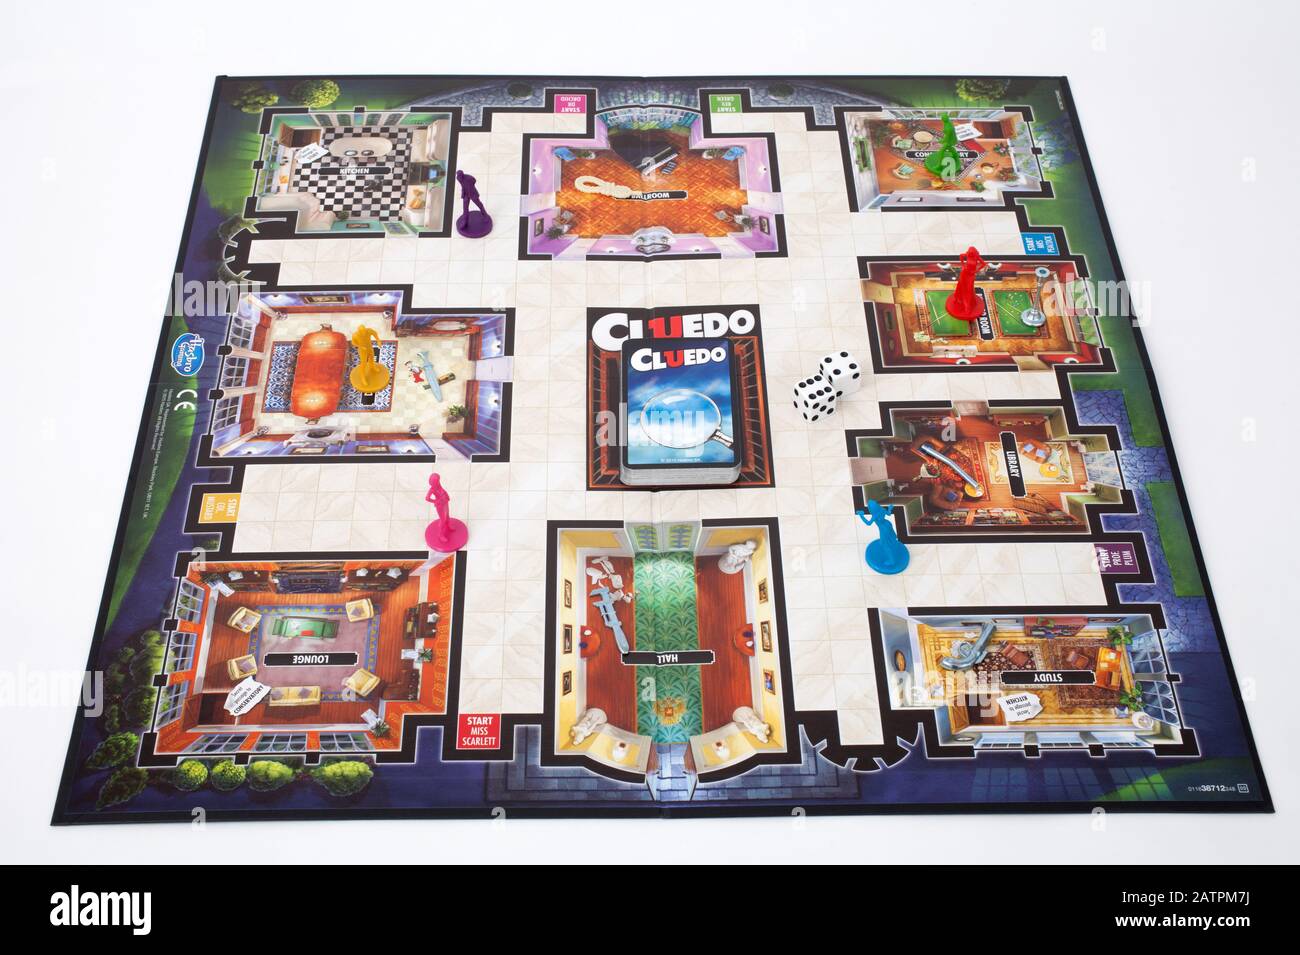 Cluedo Game High Resolution Stock Photography and Images - Alamy